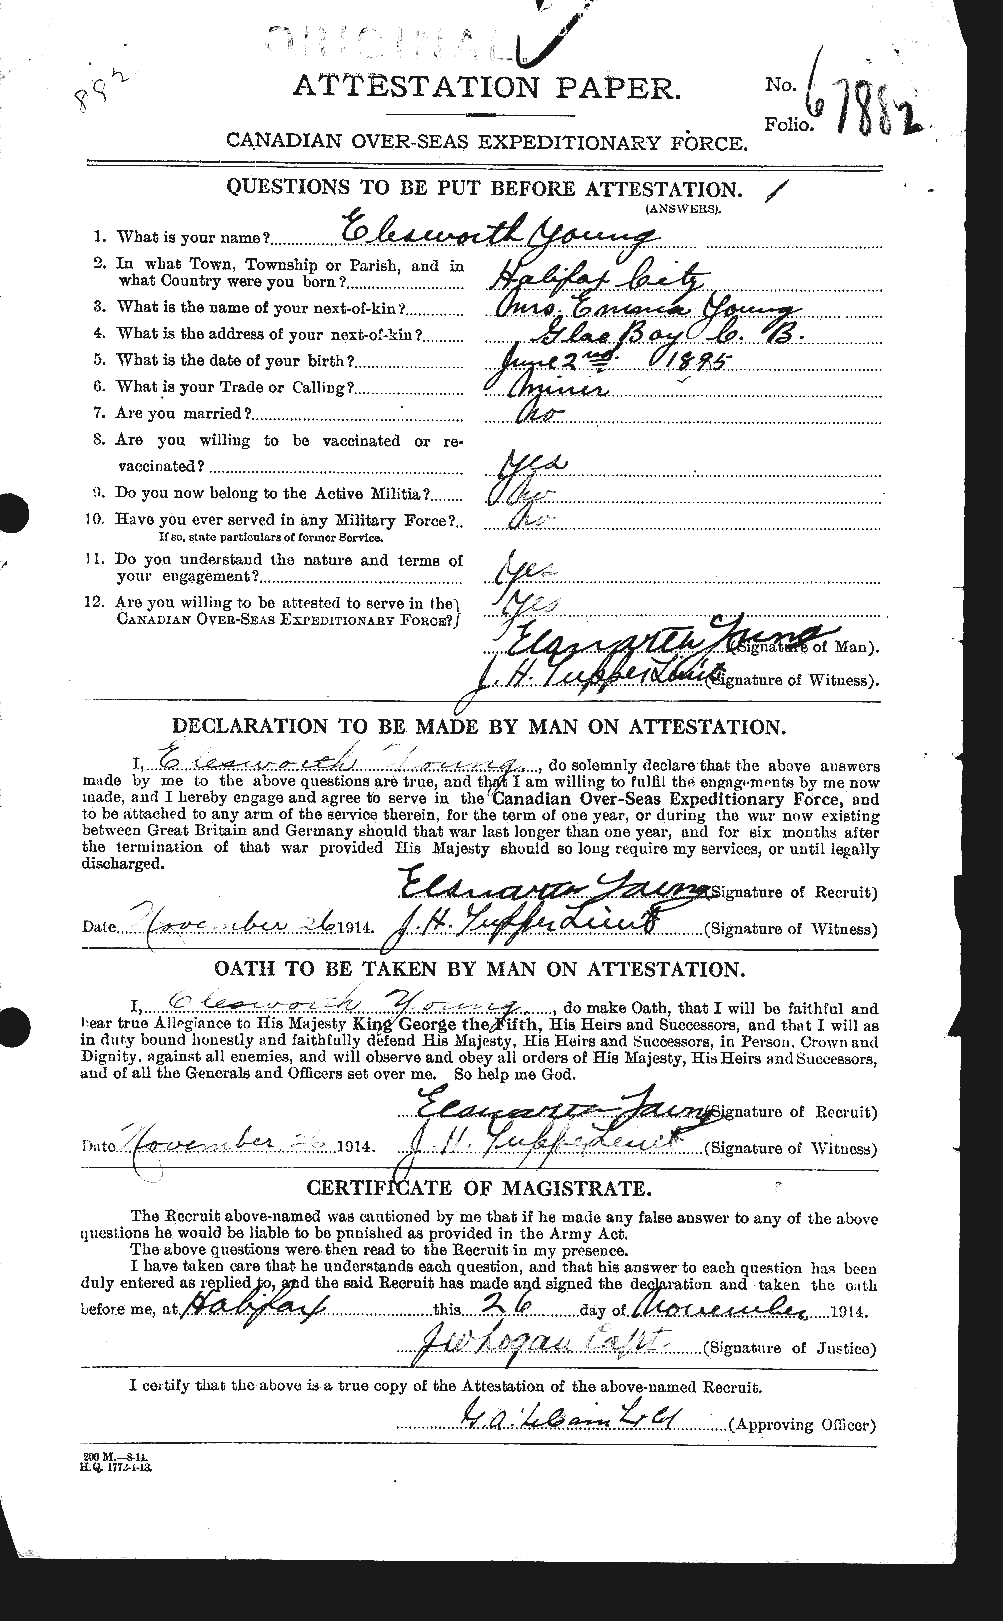 Personnel Records of the First World War - CEF 690264a